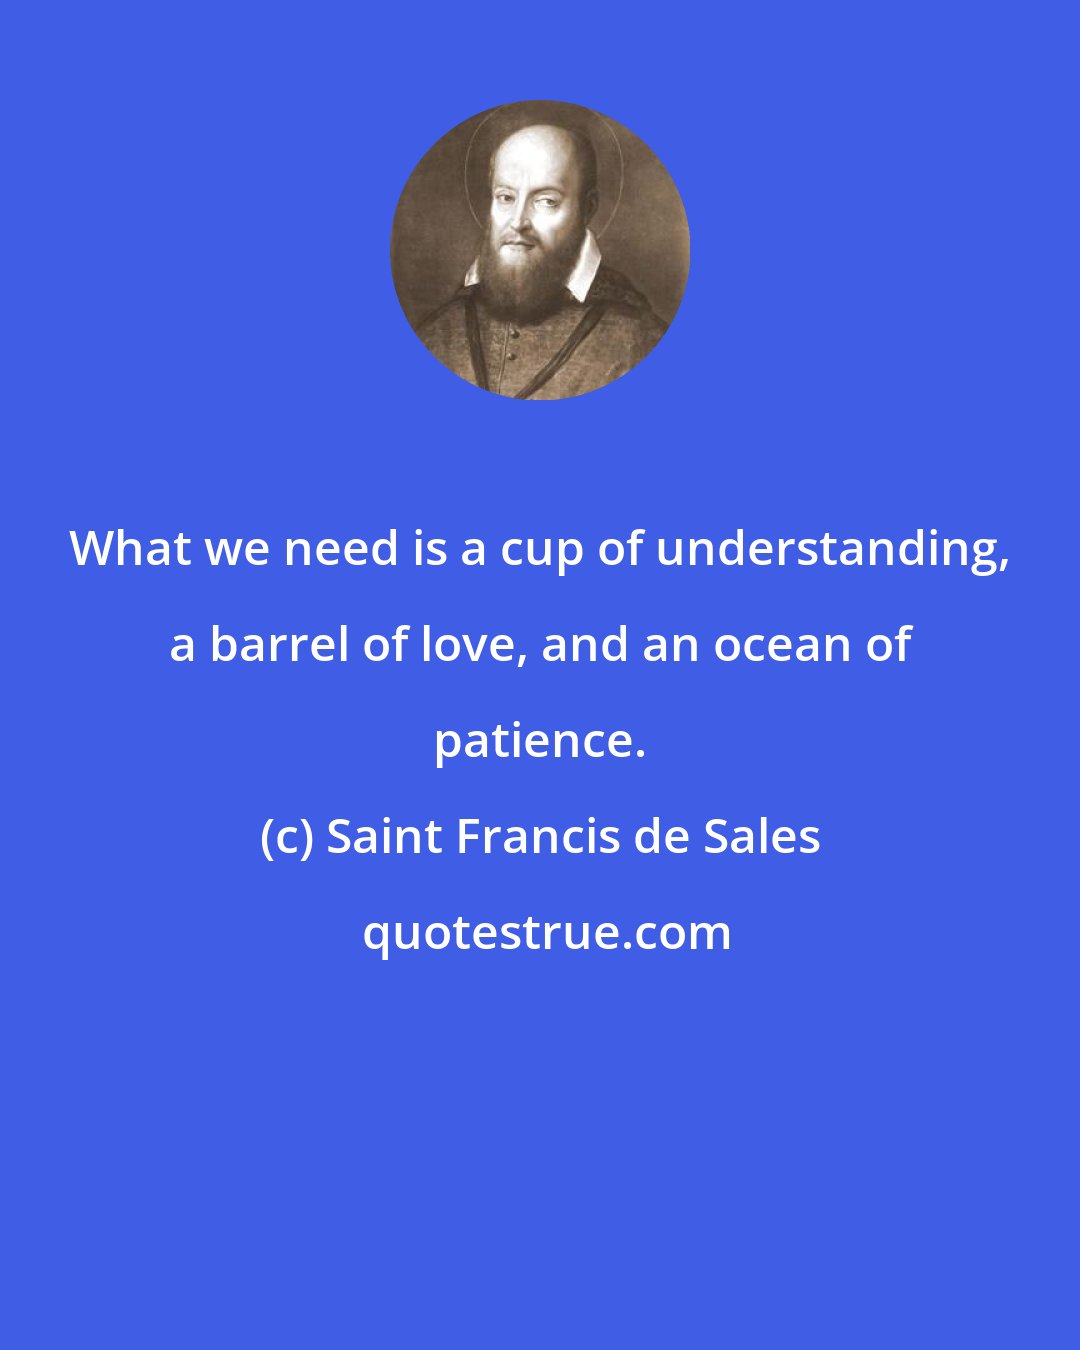 Saint Francis de Sales: What we need is a cup of understanding, a barrel of love, and an ocean of patience.